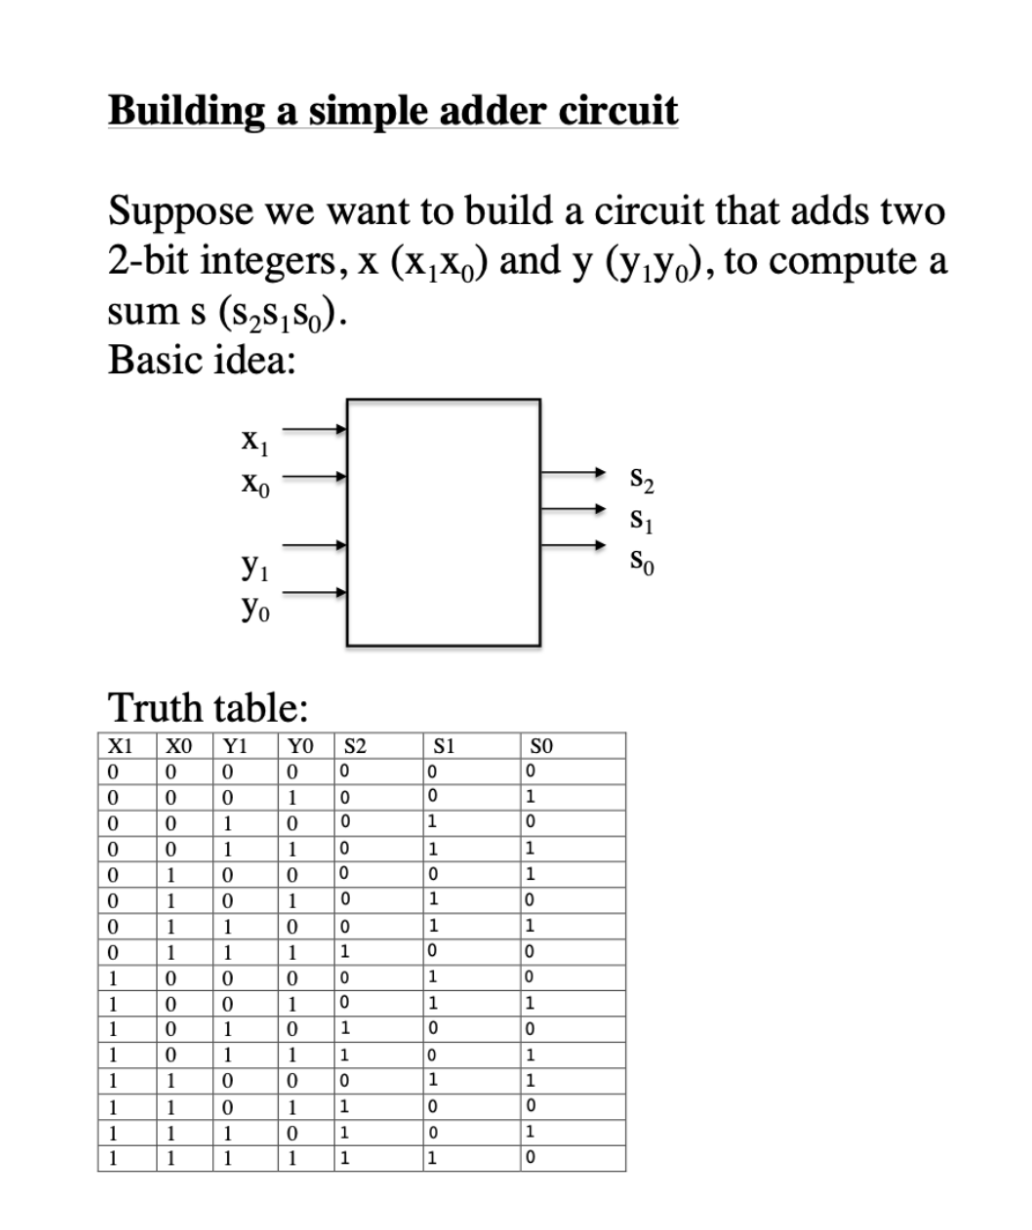 Building a simple adder circuit
Suppose we want to build a circuit that adds two
2-bit integers, x (x₁x) and y (y₁yo), to compute a
sum s (s₂S₁S₁).
Basic idea:
X1
0
0
0
0
0
0
Truth table:
0
0
1
1
1
1
1
1
1
1
0
0
0
1
1
1
1
X1
Xo
ΧΟ Y1 YO S2
0
0
0
0
0
0
0
0
1
0
0
1
1
0
1
1
1
0
0
1
1
0
0
1
1
0
У1
Уо
0
1
1
1-0
1 0
0
0
1
0
1
0
1
0
1
0
1
0
1
0
0
1
0
0
1
1
0
1
1
1
$1
0
0
1
1
1
1
0
1
1
0
0
1
0
0
1
SO
0
1
0
1
0
1
0
0
1
0
1
1
0
1
0
S₂
S1
So